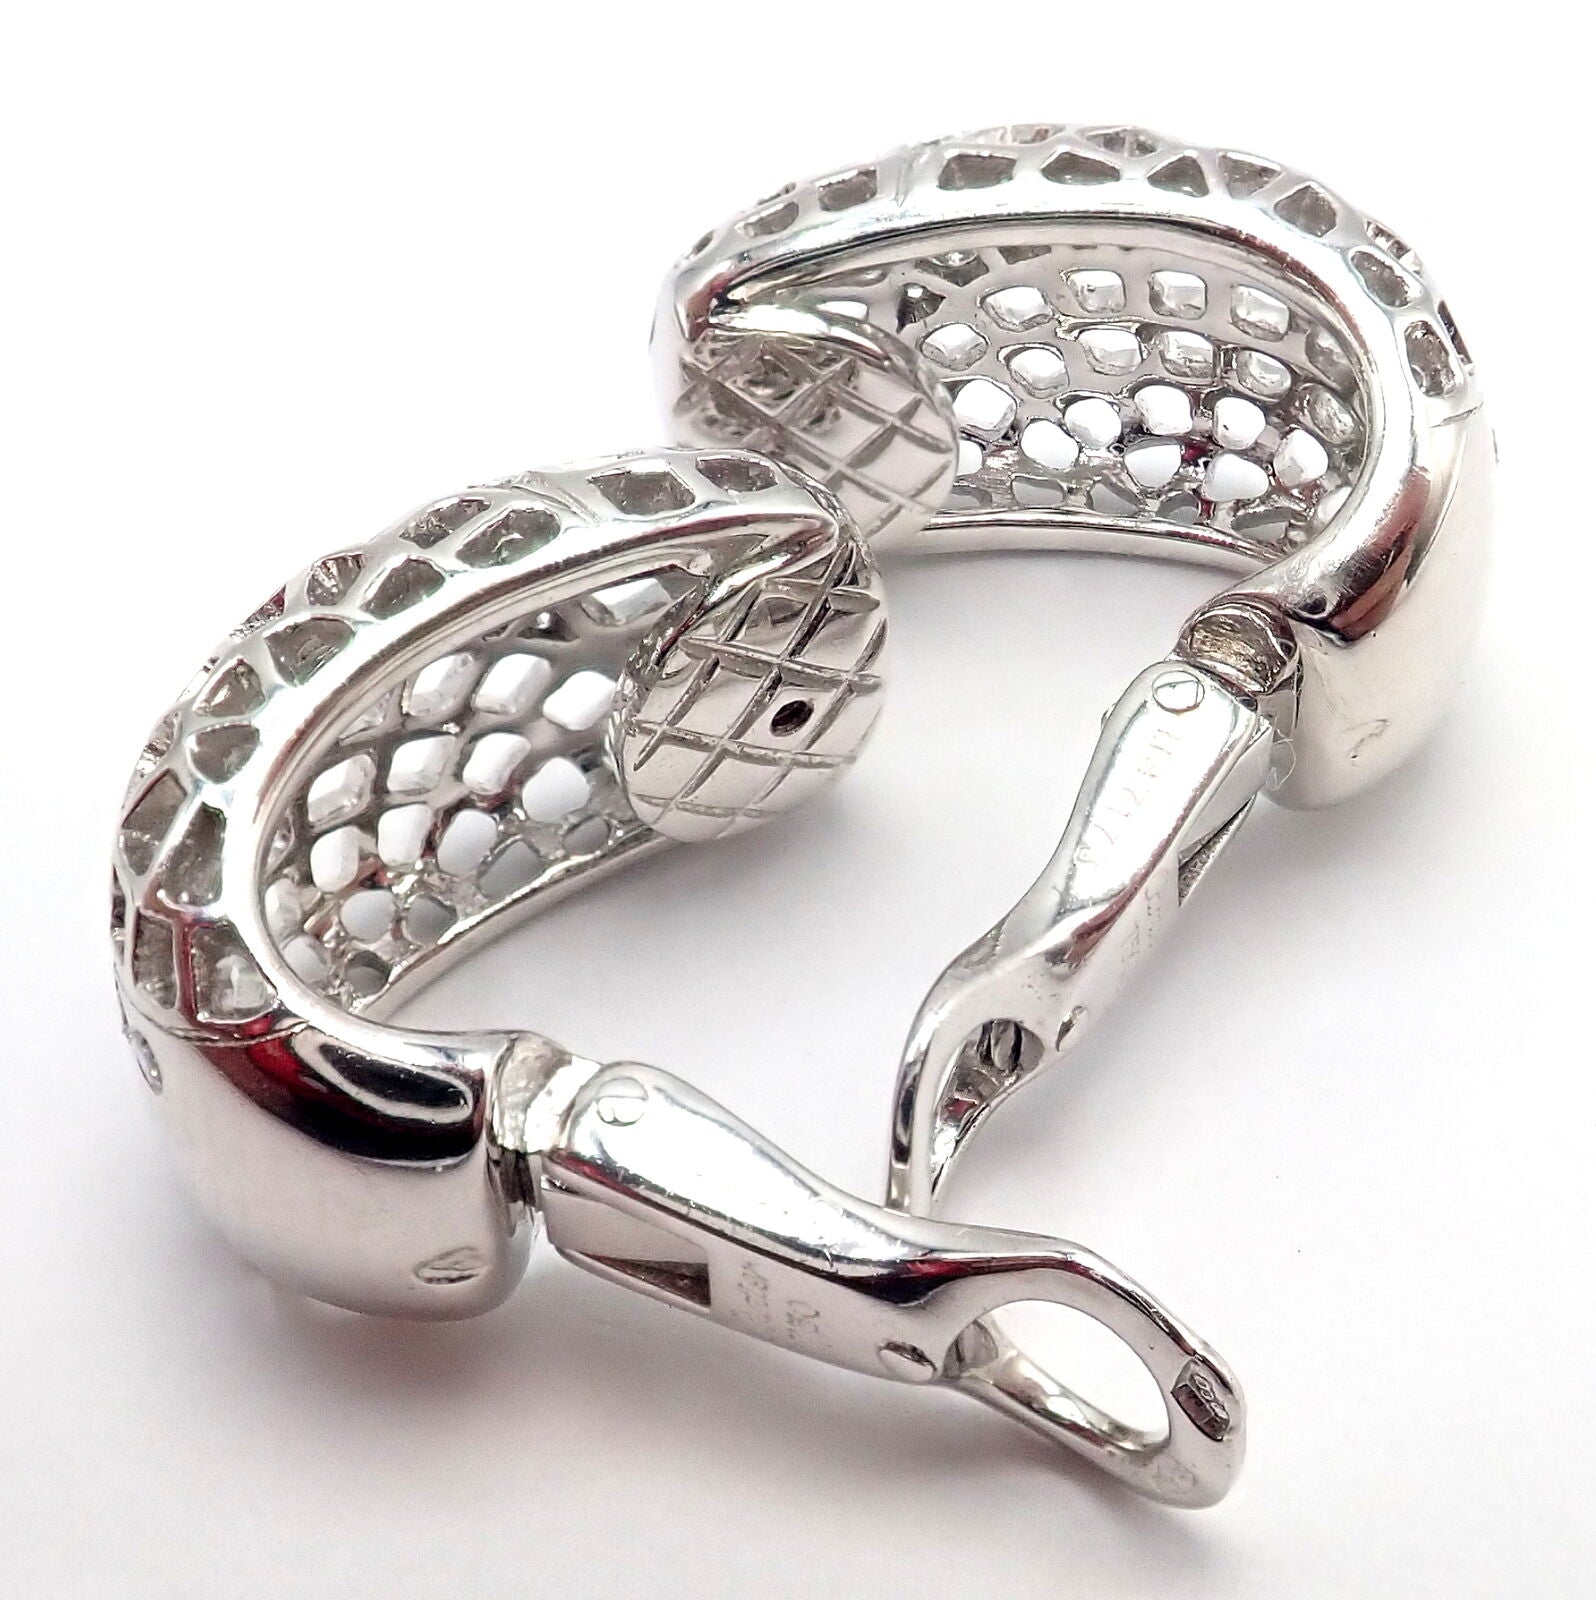 Cartier Jewelry & Watches:Fine Jewelry:Earrings Authentic! Cartier 18k White Gold Diamond Nouvelle Vague Earrings